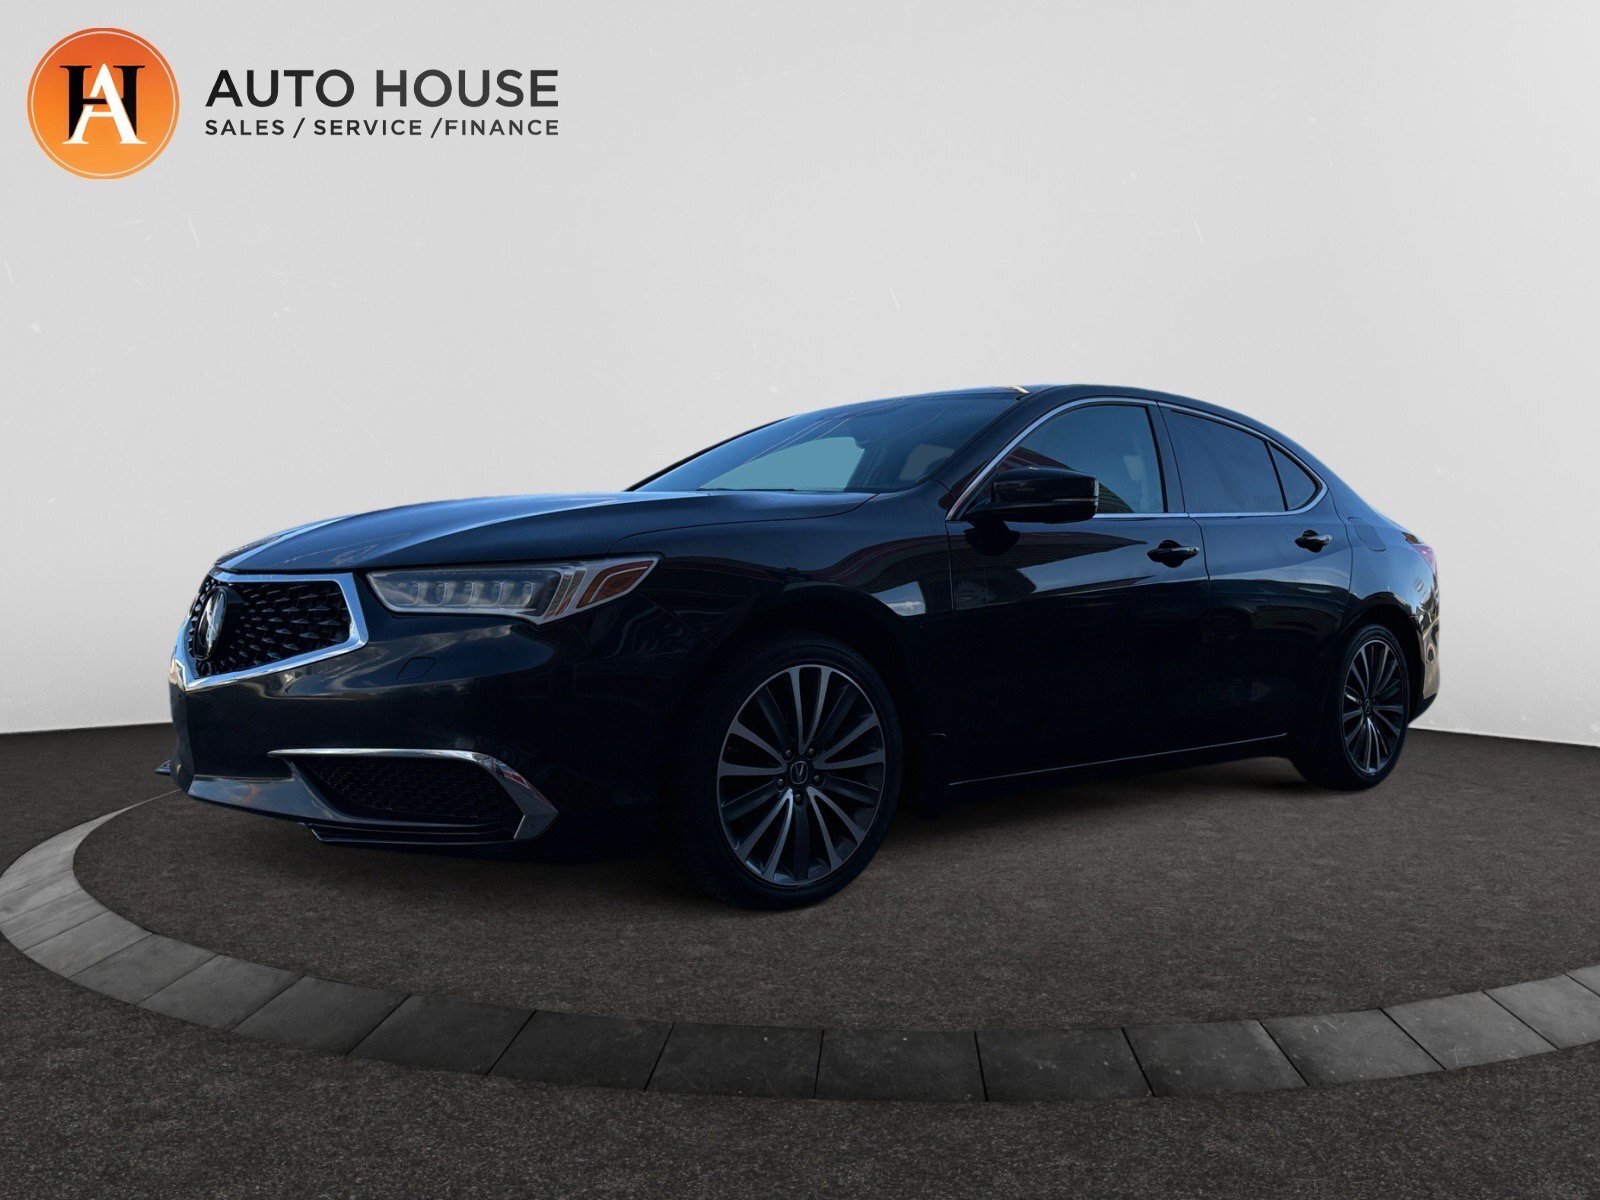 2018 Acura TLX TECH PACKAGE | LEATHER | NAVIGATION | BCAMERA AWD